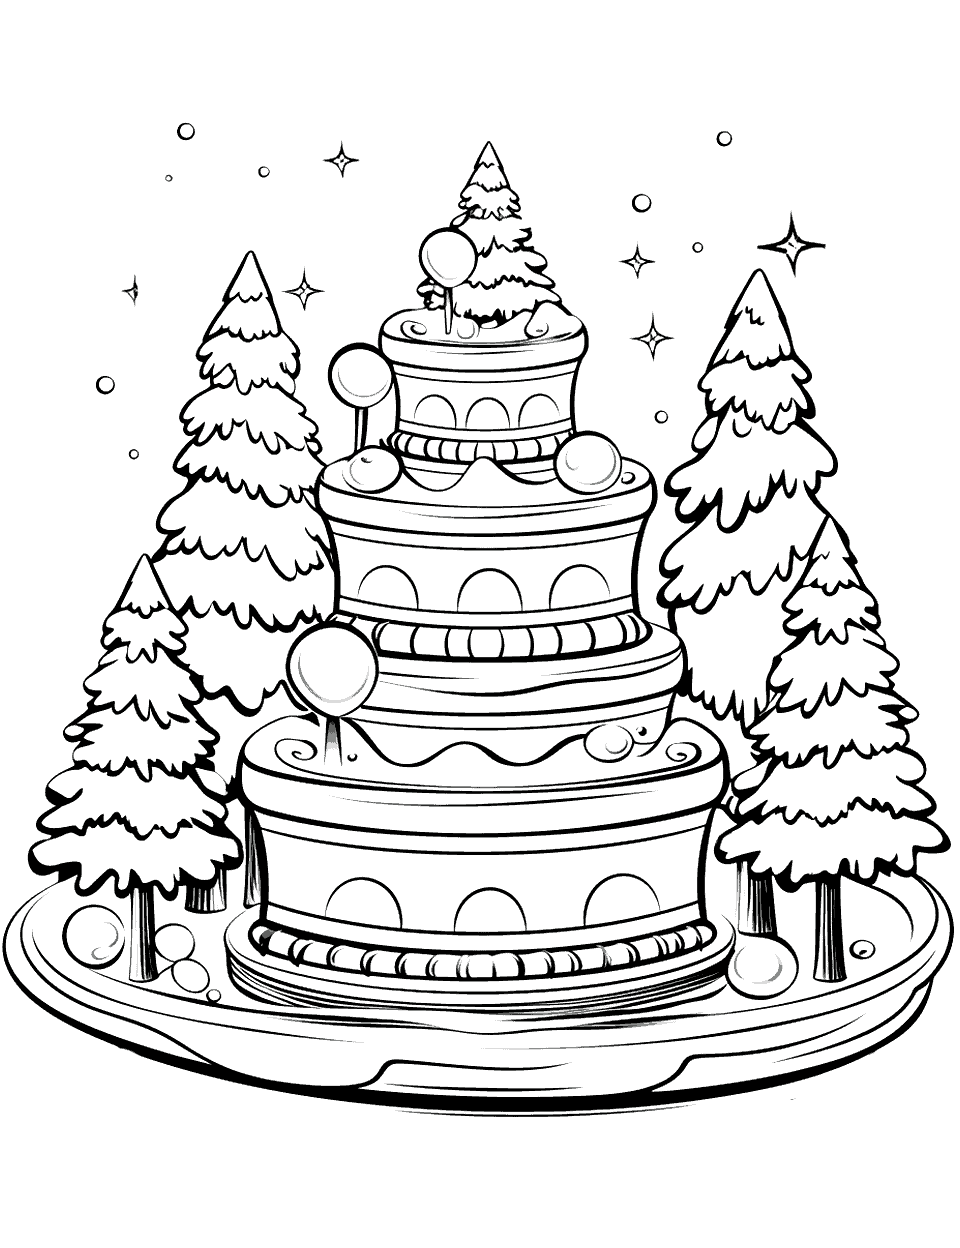 Winter Wonderland Cake Coloring Page - A cake depicting a snowy landscape with snow and trees.